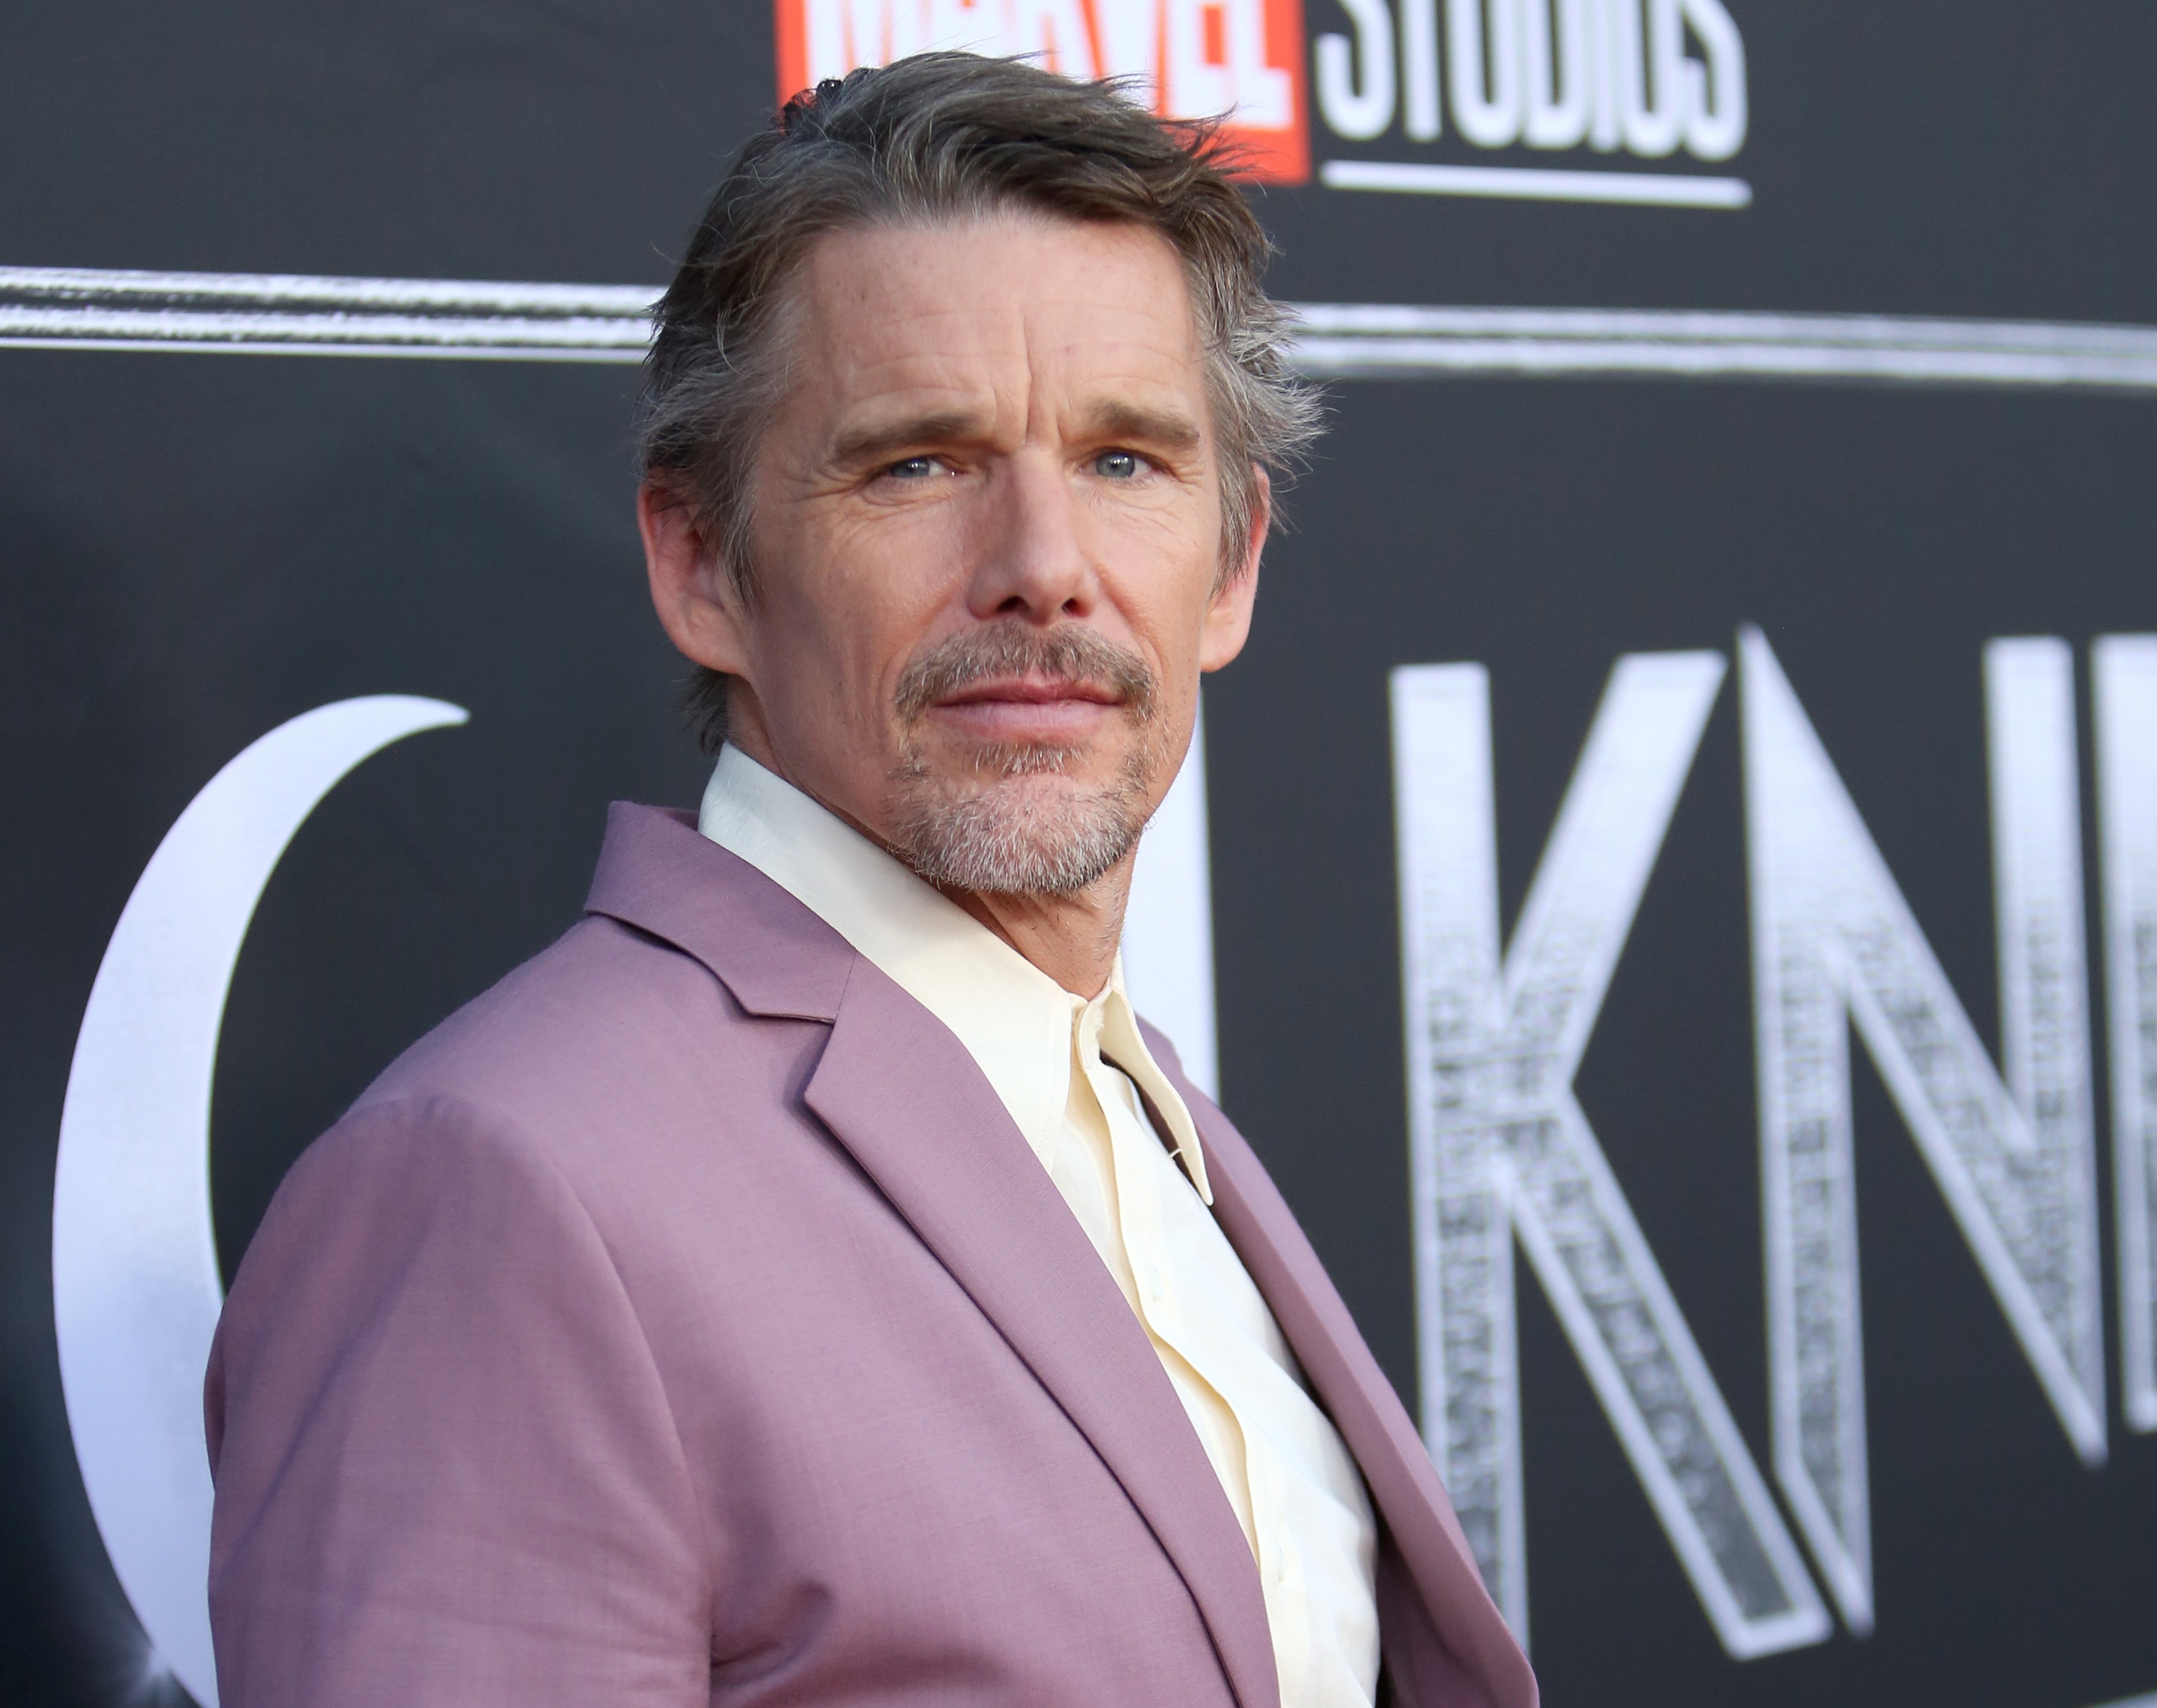 LOS ANGELES, CALIFORNIA - MARCH 22:  Ethan Hawke attends the Moon Knight Los Angeles Special Launch Event at the El Capitan Theatre in Hollywood, California on March 22, 2022. (Photo by Jesse Grant/Getty Images for Disney)